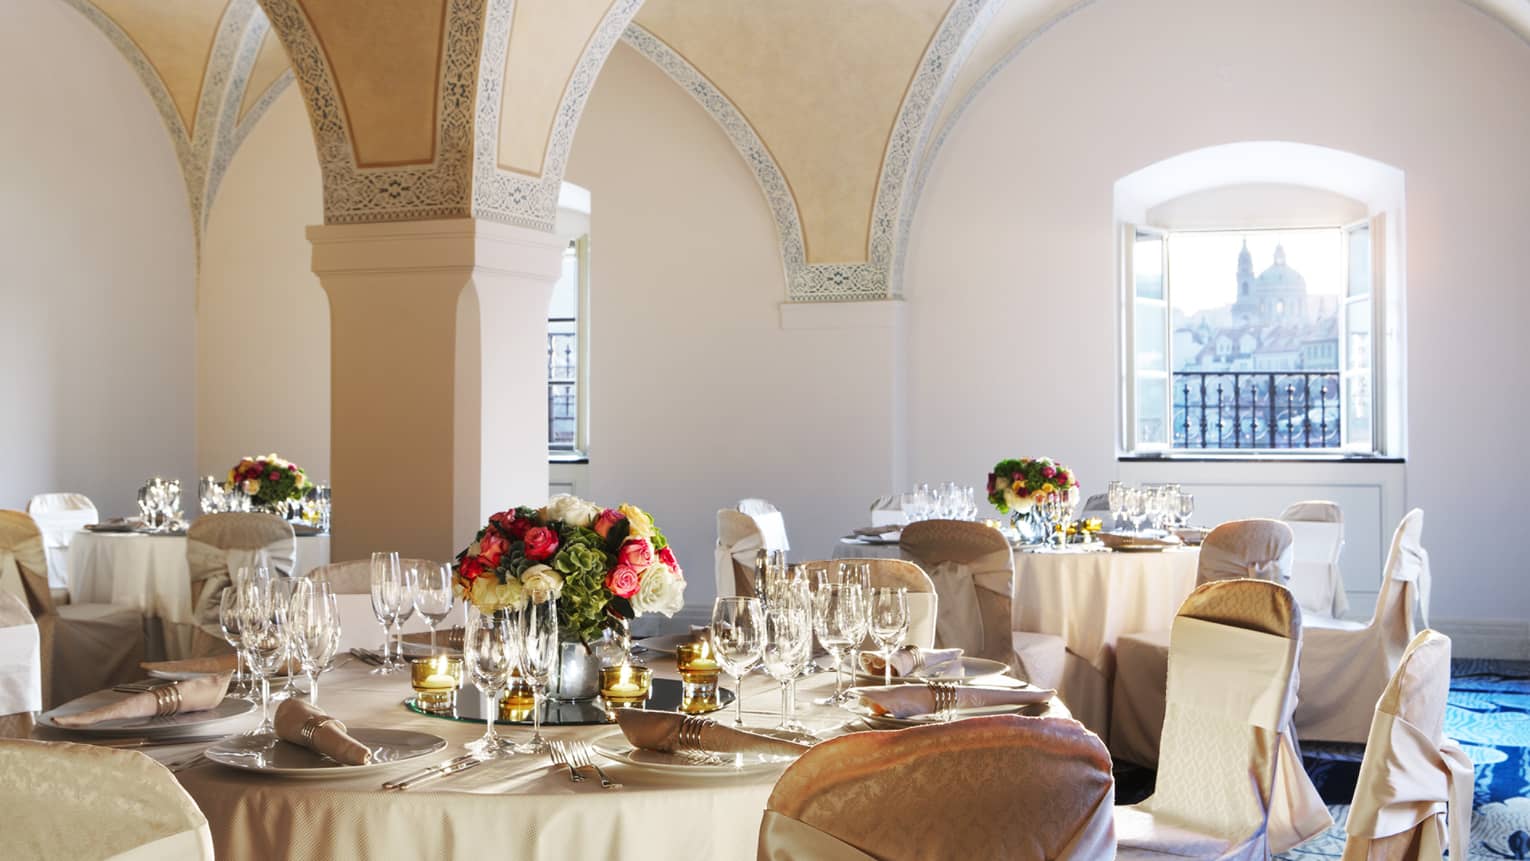 Vltava Meeting Room banquet tables under arched ceiling, sunny windows